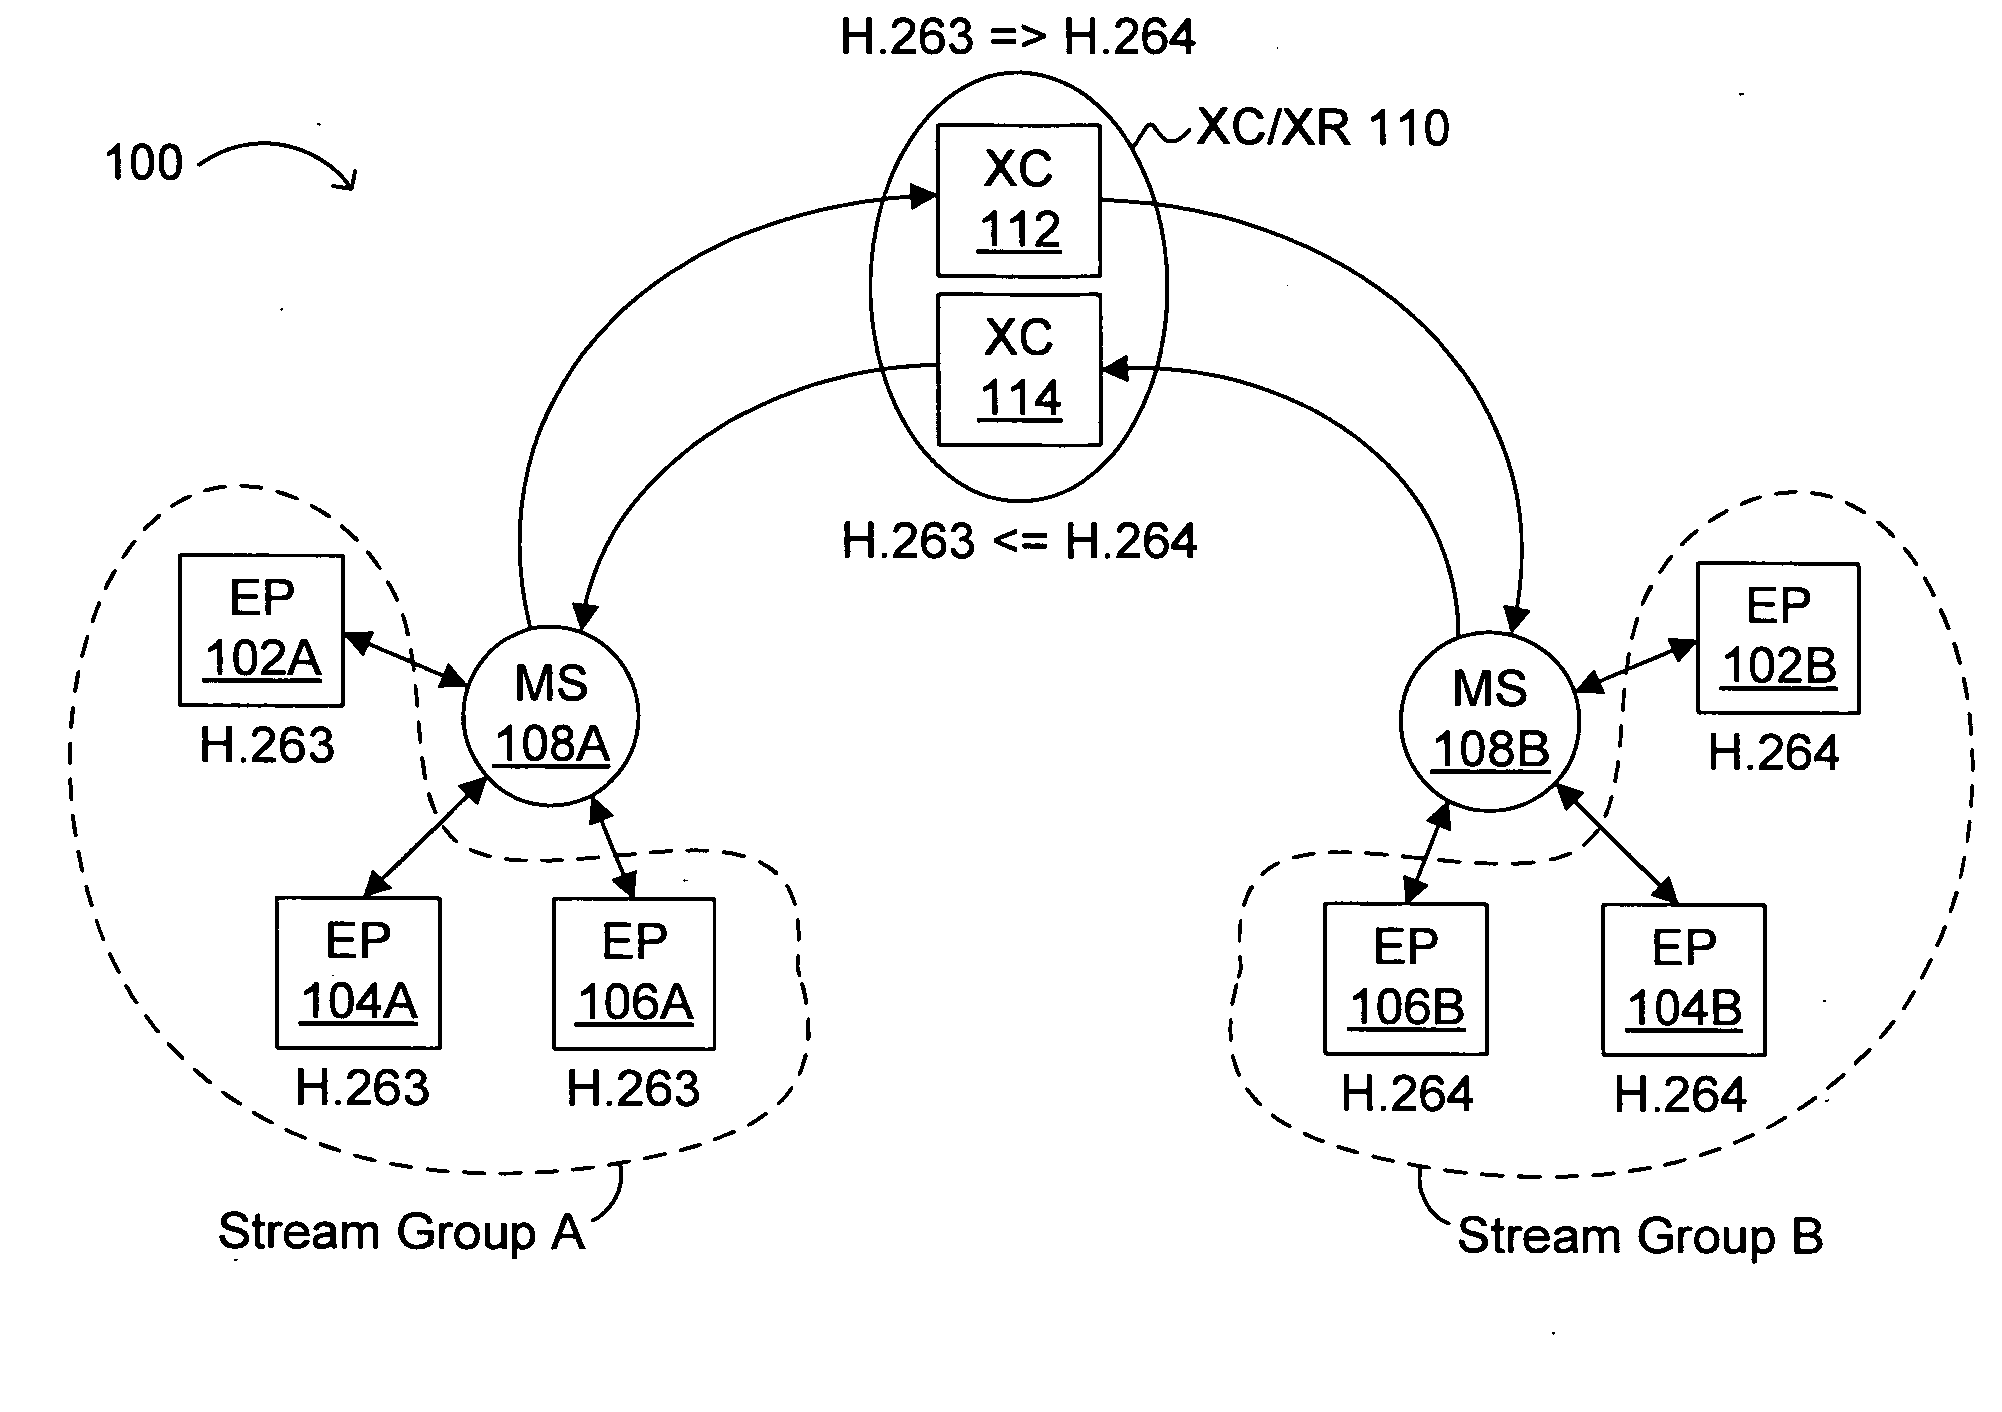 Method and apparatus for transcoding and transrating in distributed video systems